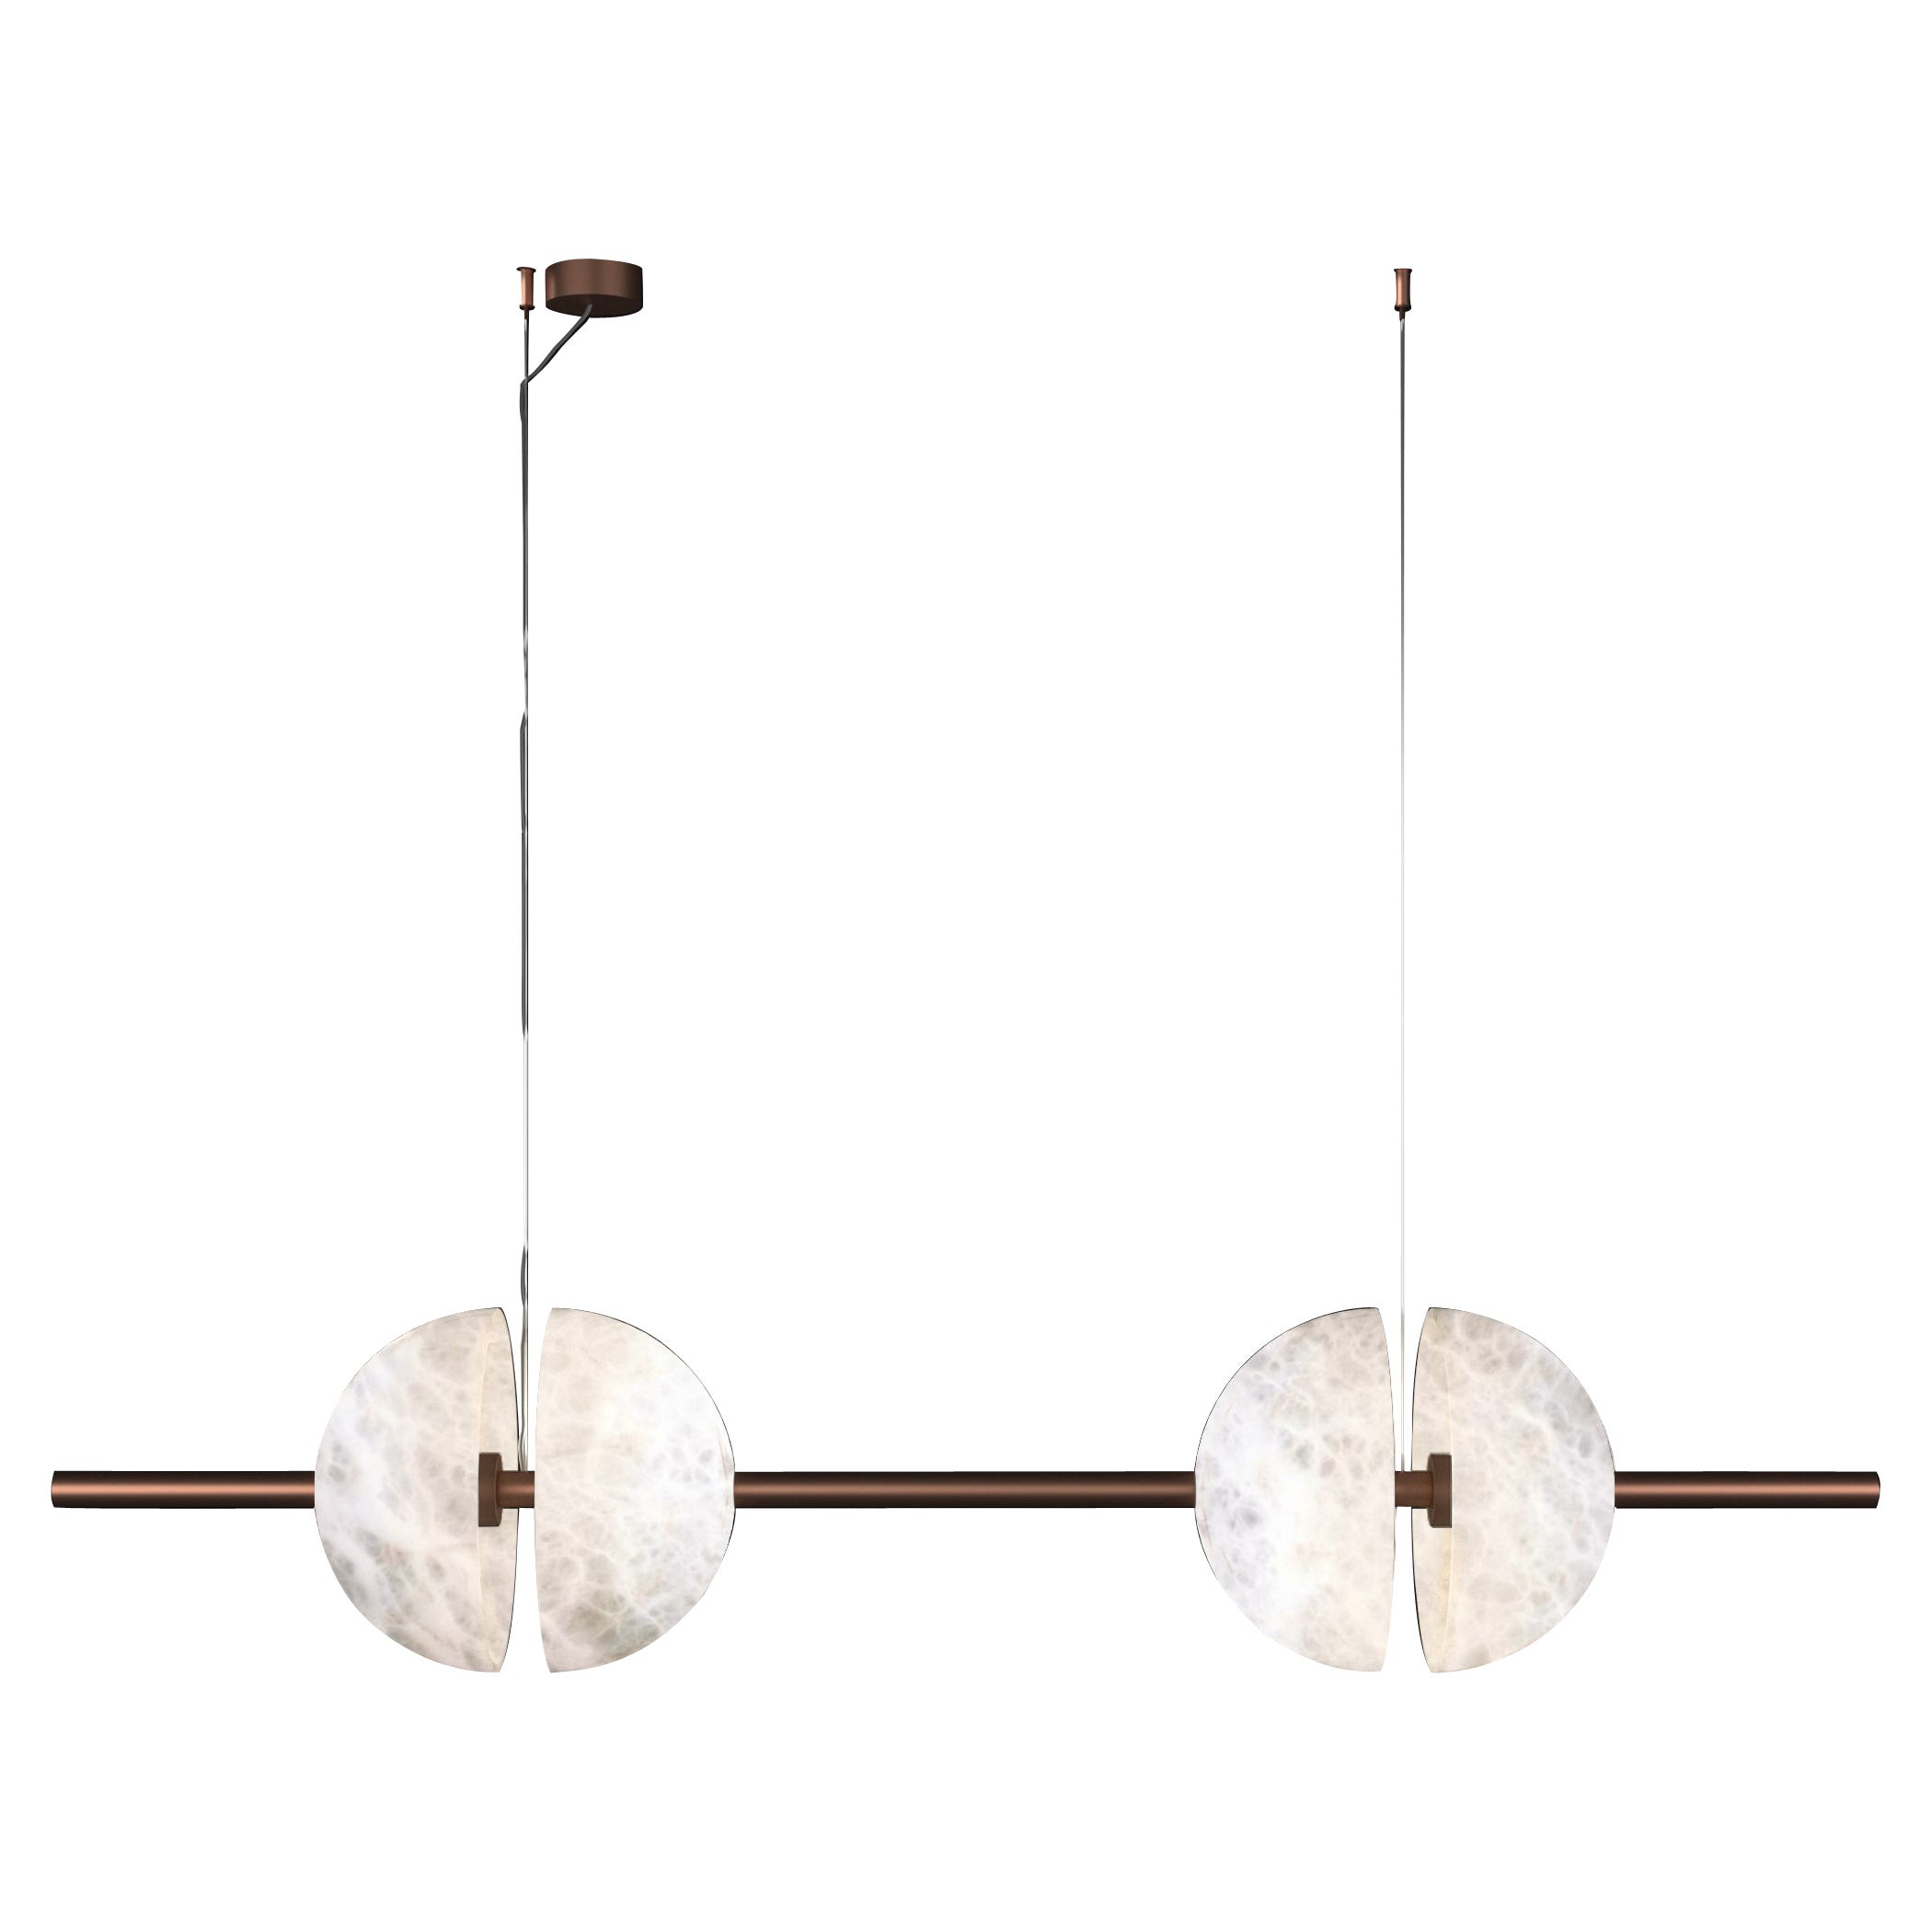 Ermes Copper And Alabaster Pendant Light 1 by Alabastro Italiano